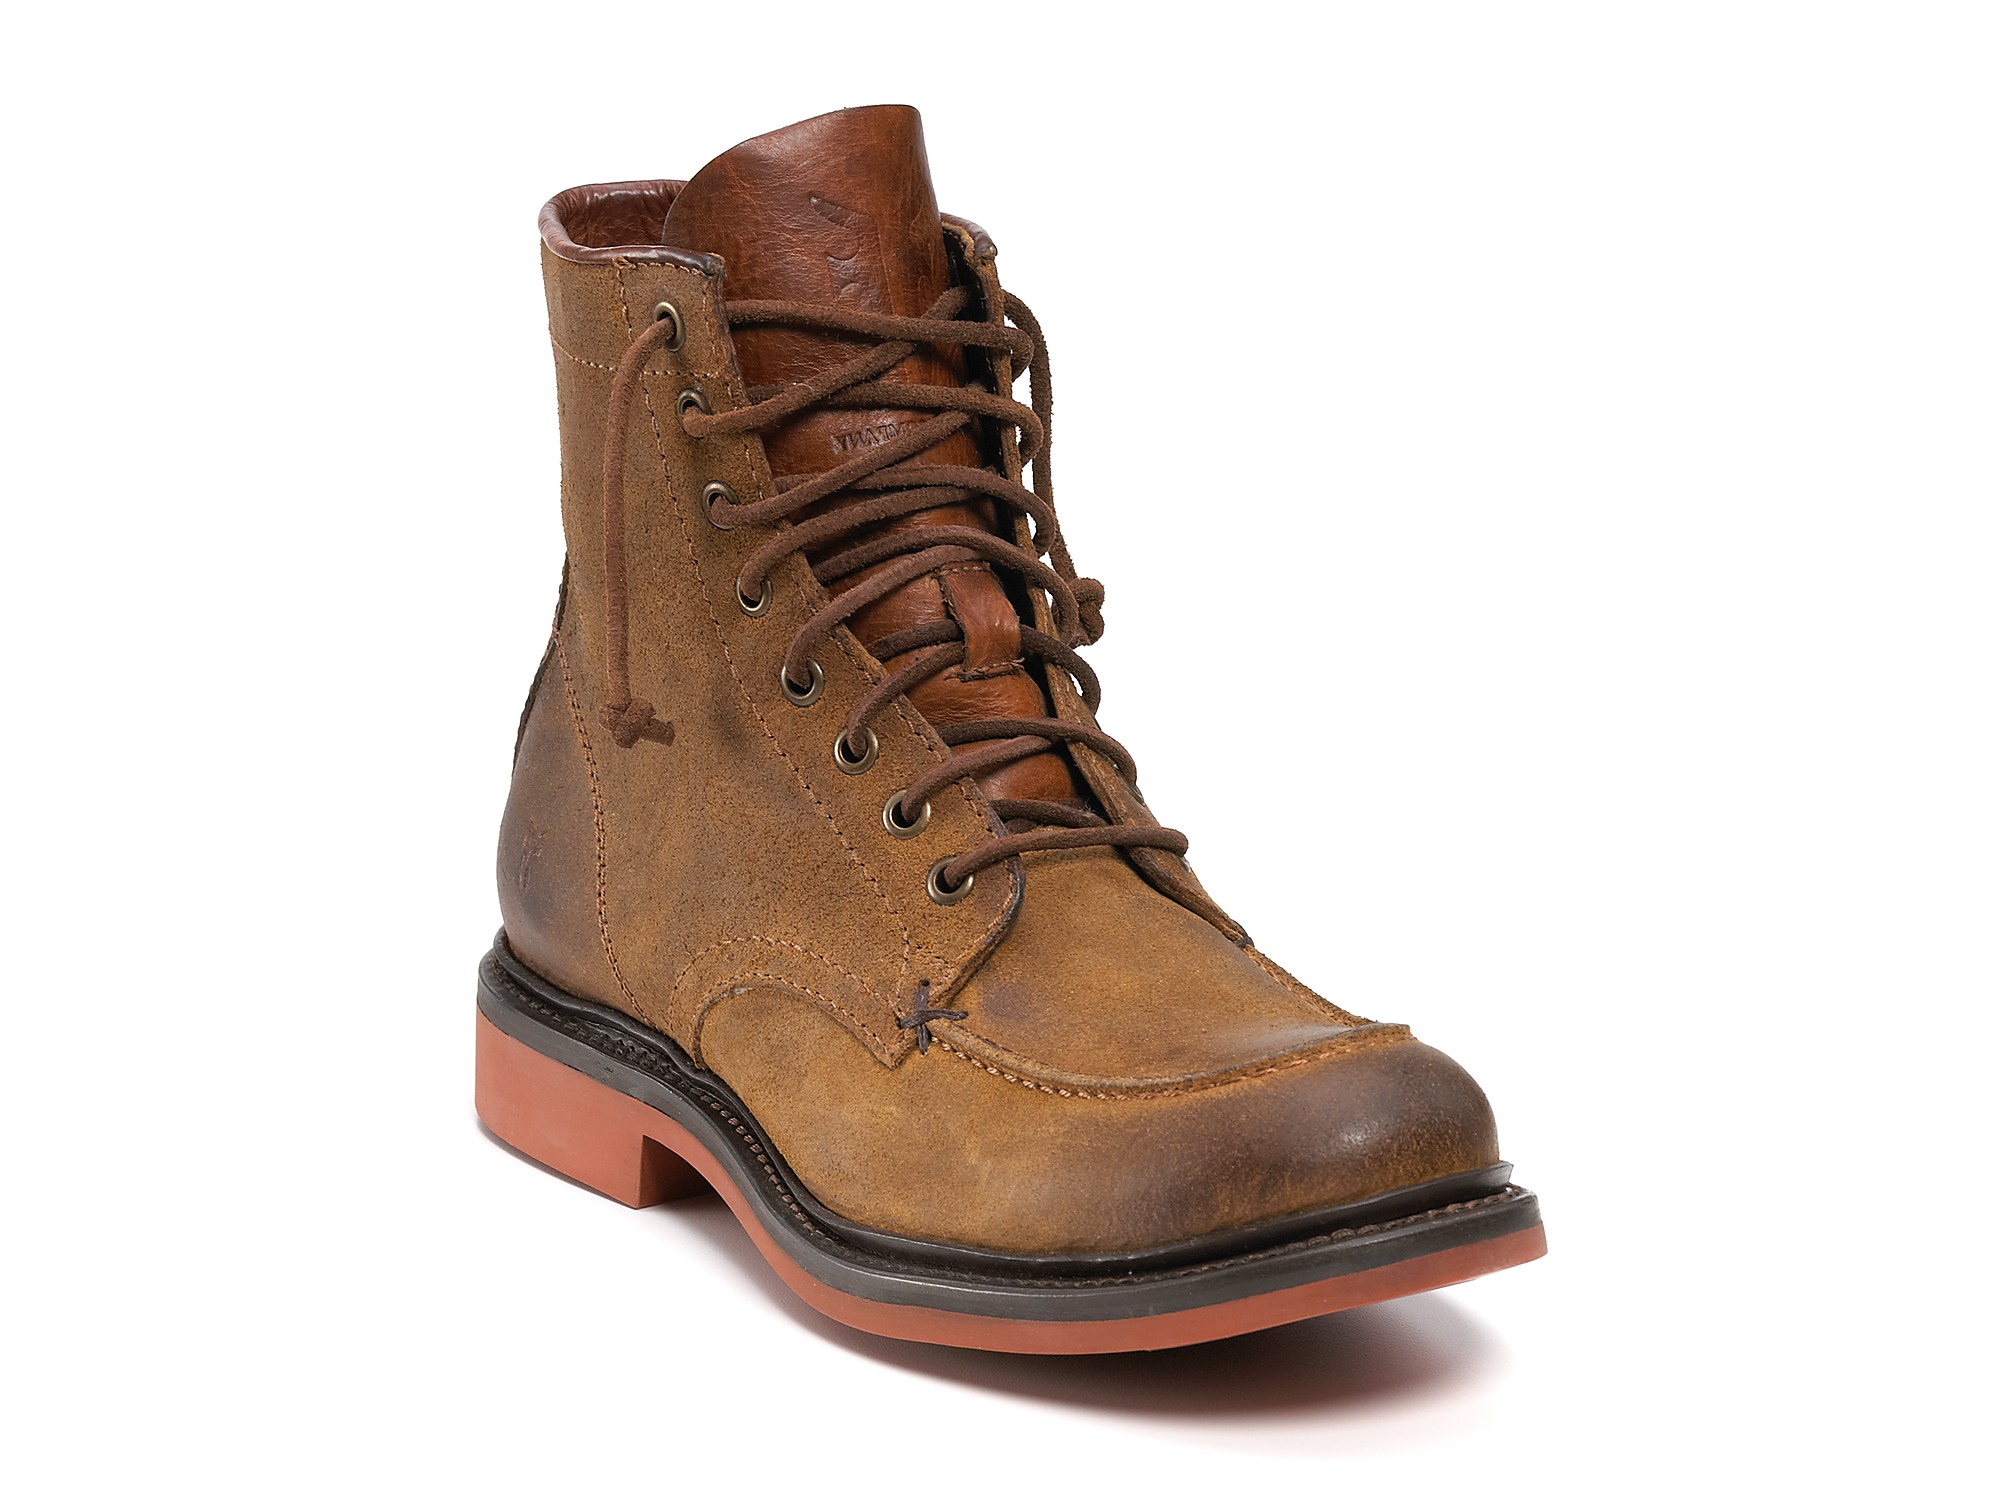 Frye Wallace Lace Up Boots in Tan 